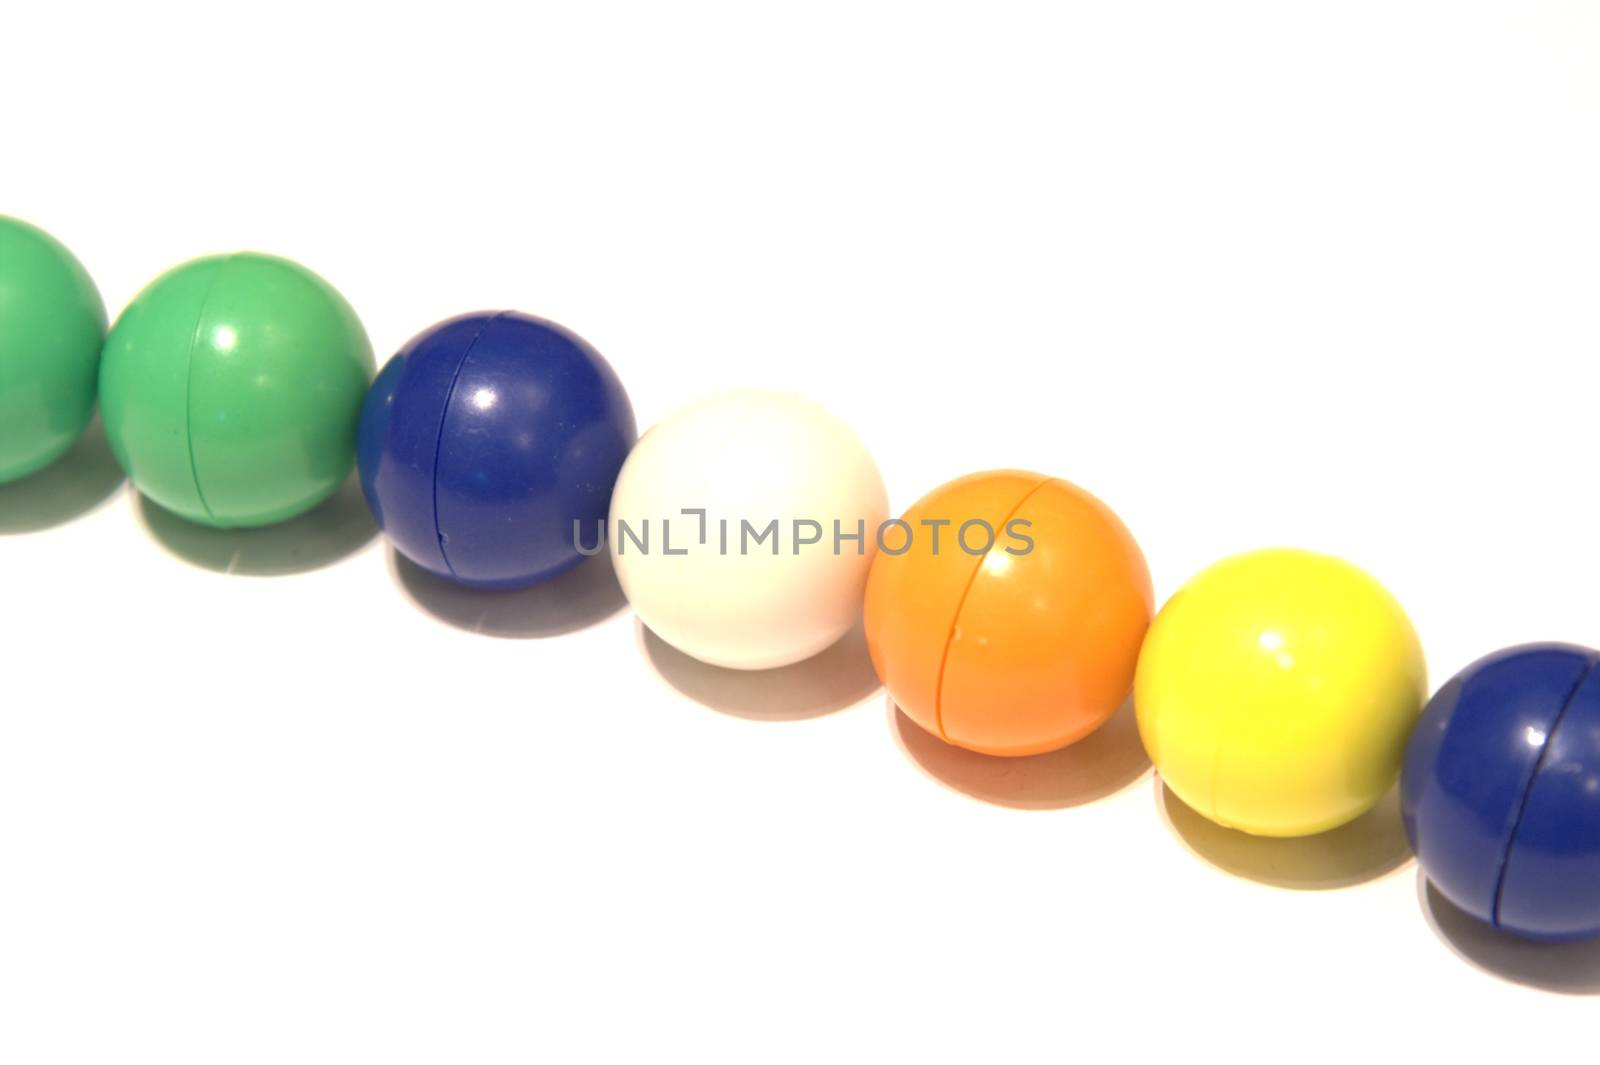 Color balls and a metal ball on white background created an abstract construction, connected, isolated